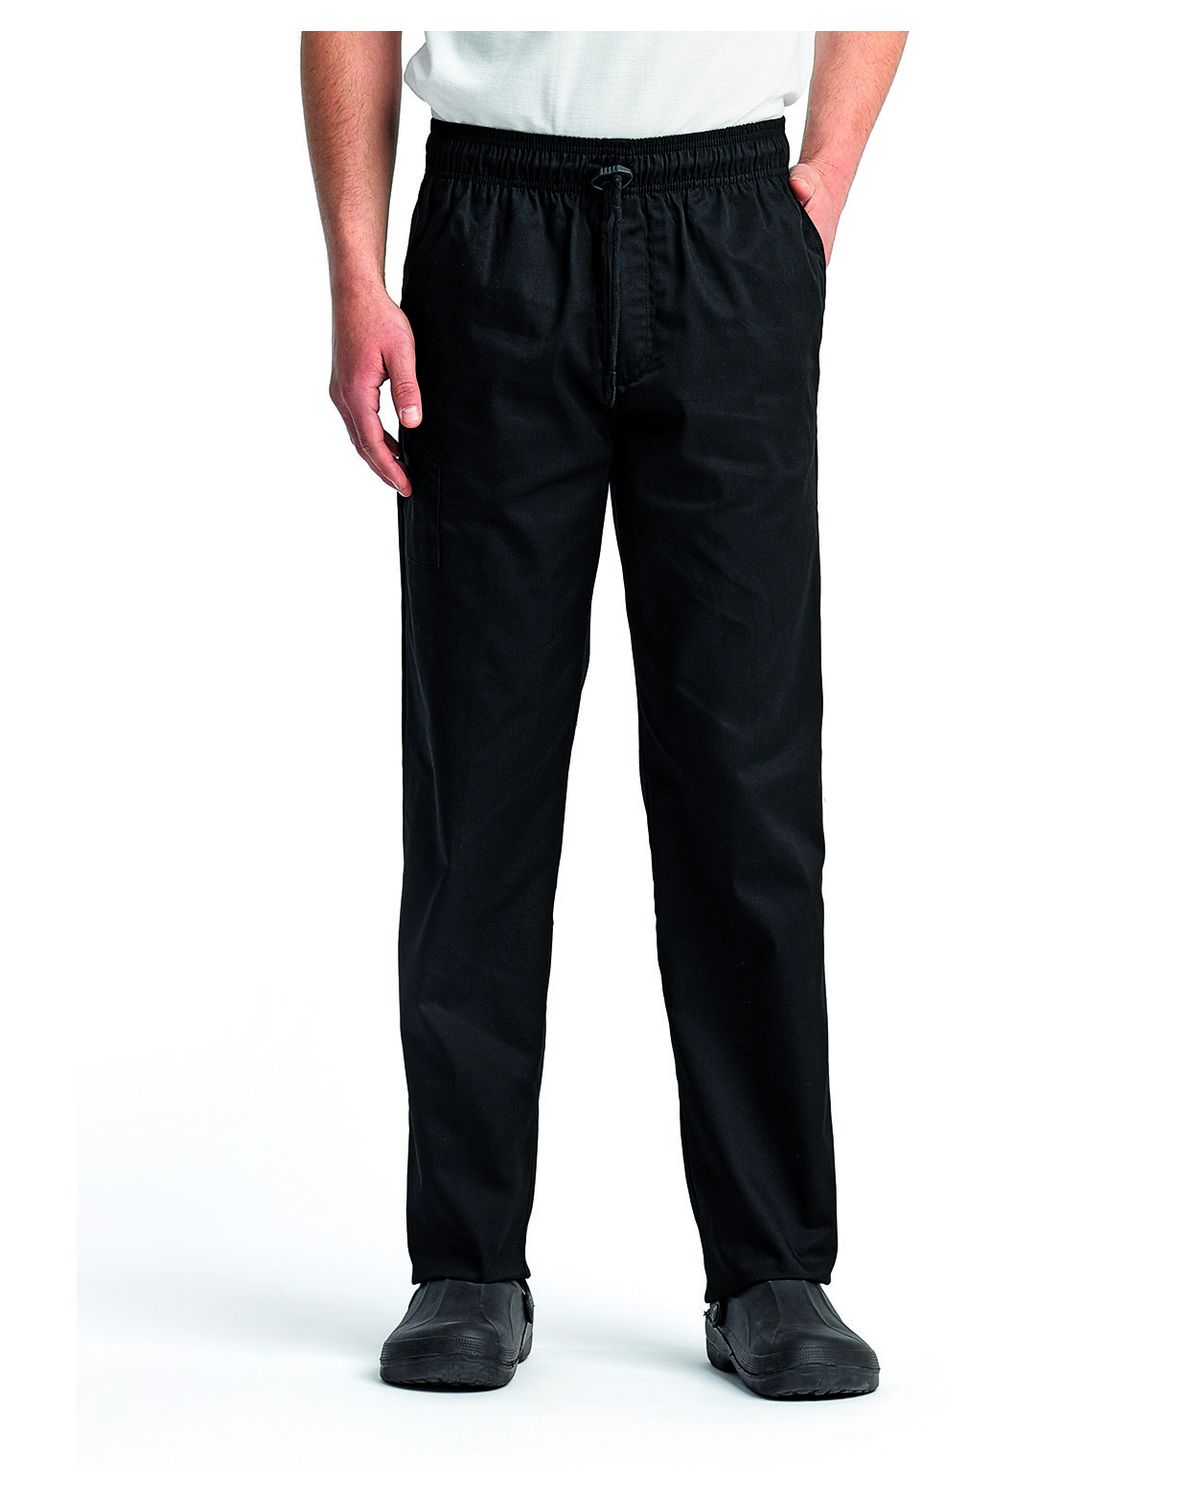 'Artisan Collection by Reprime RP554 Unisex Chef's Select Slim Leg Pant'